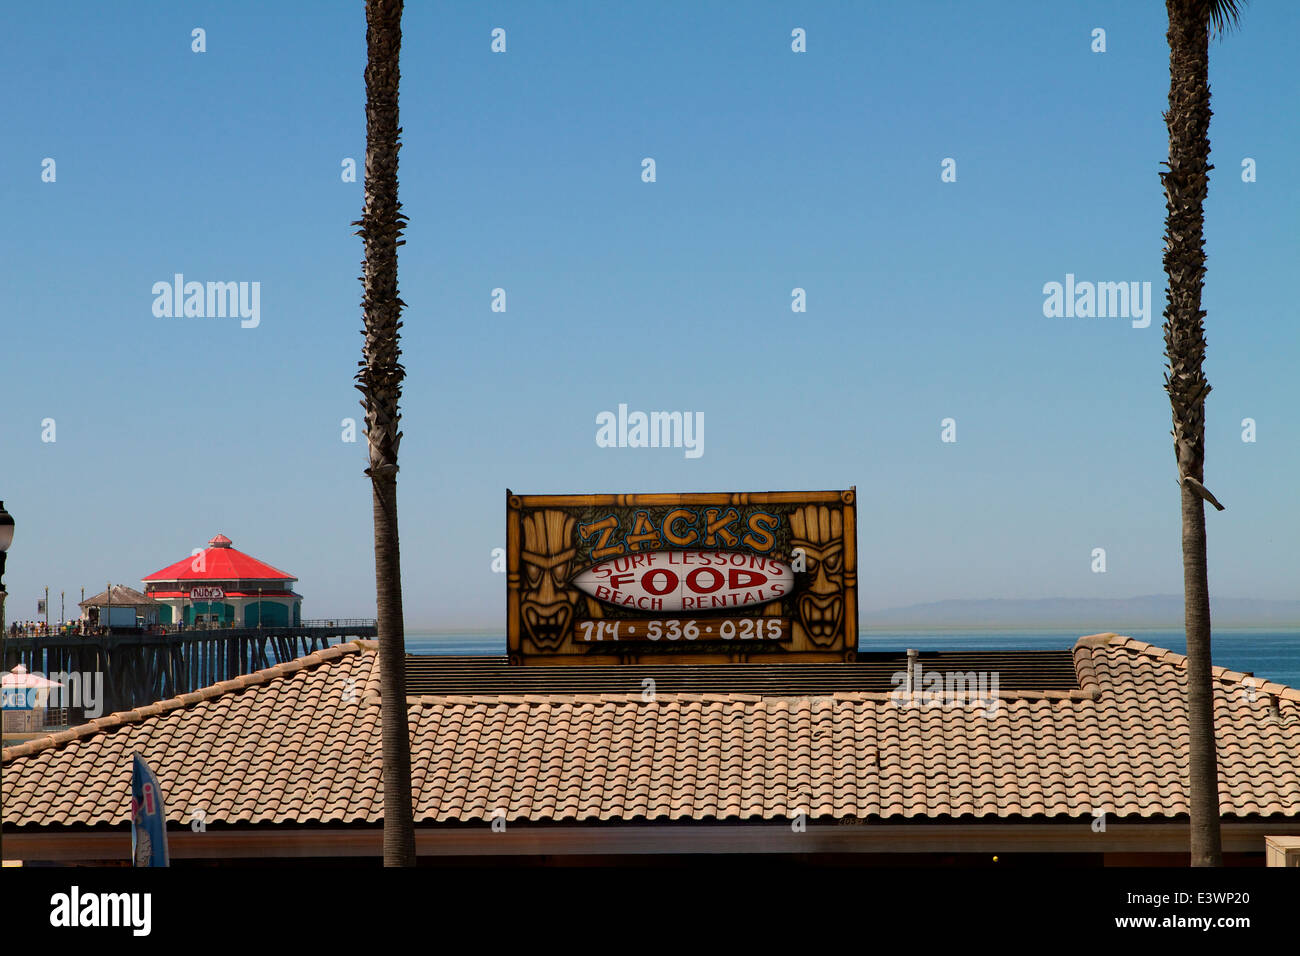 Sign on the store roof for zacks surf lessons and beach rentals with ruby's restaurant in the background at Huntington Beach ca Stock Photo